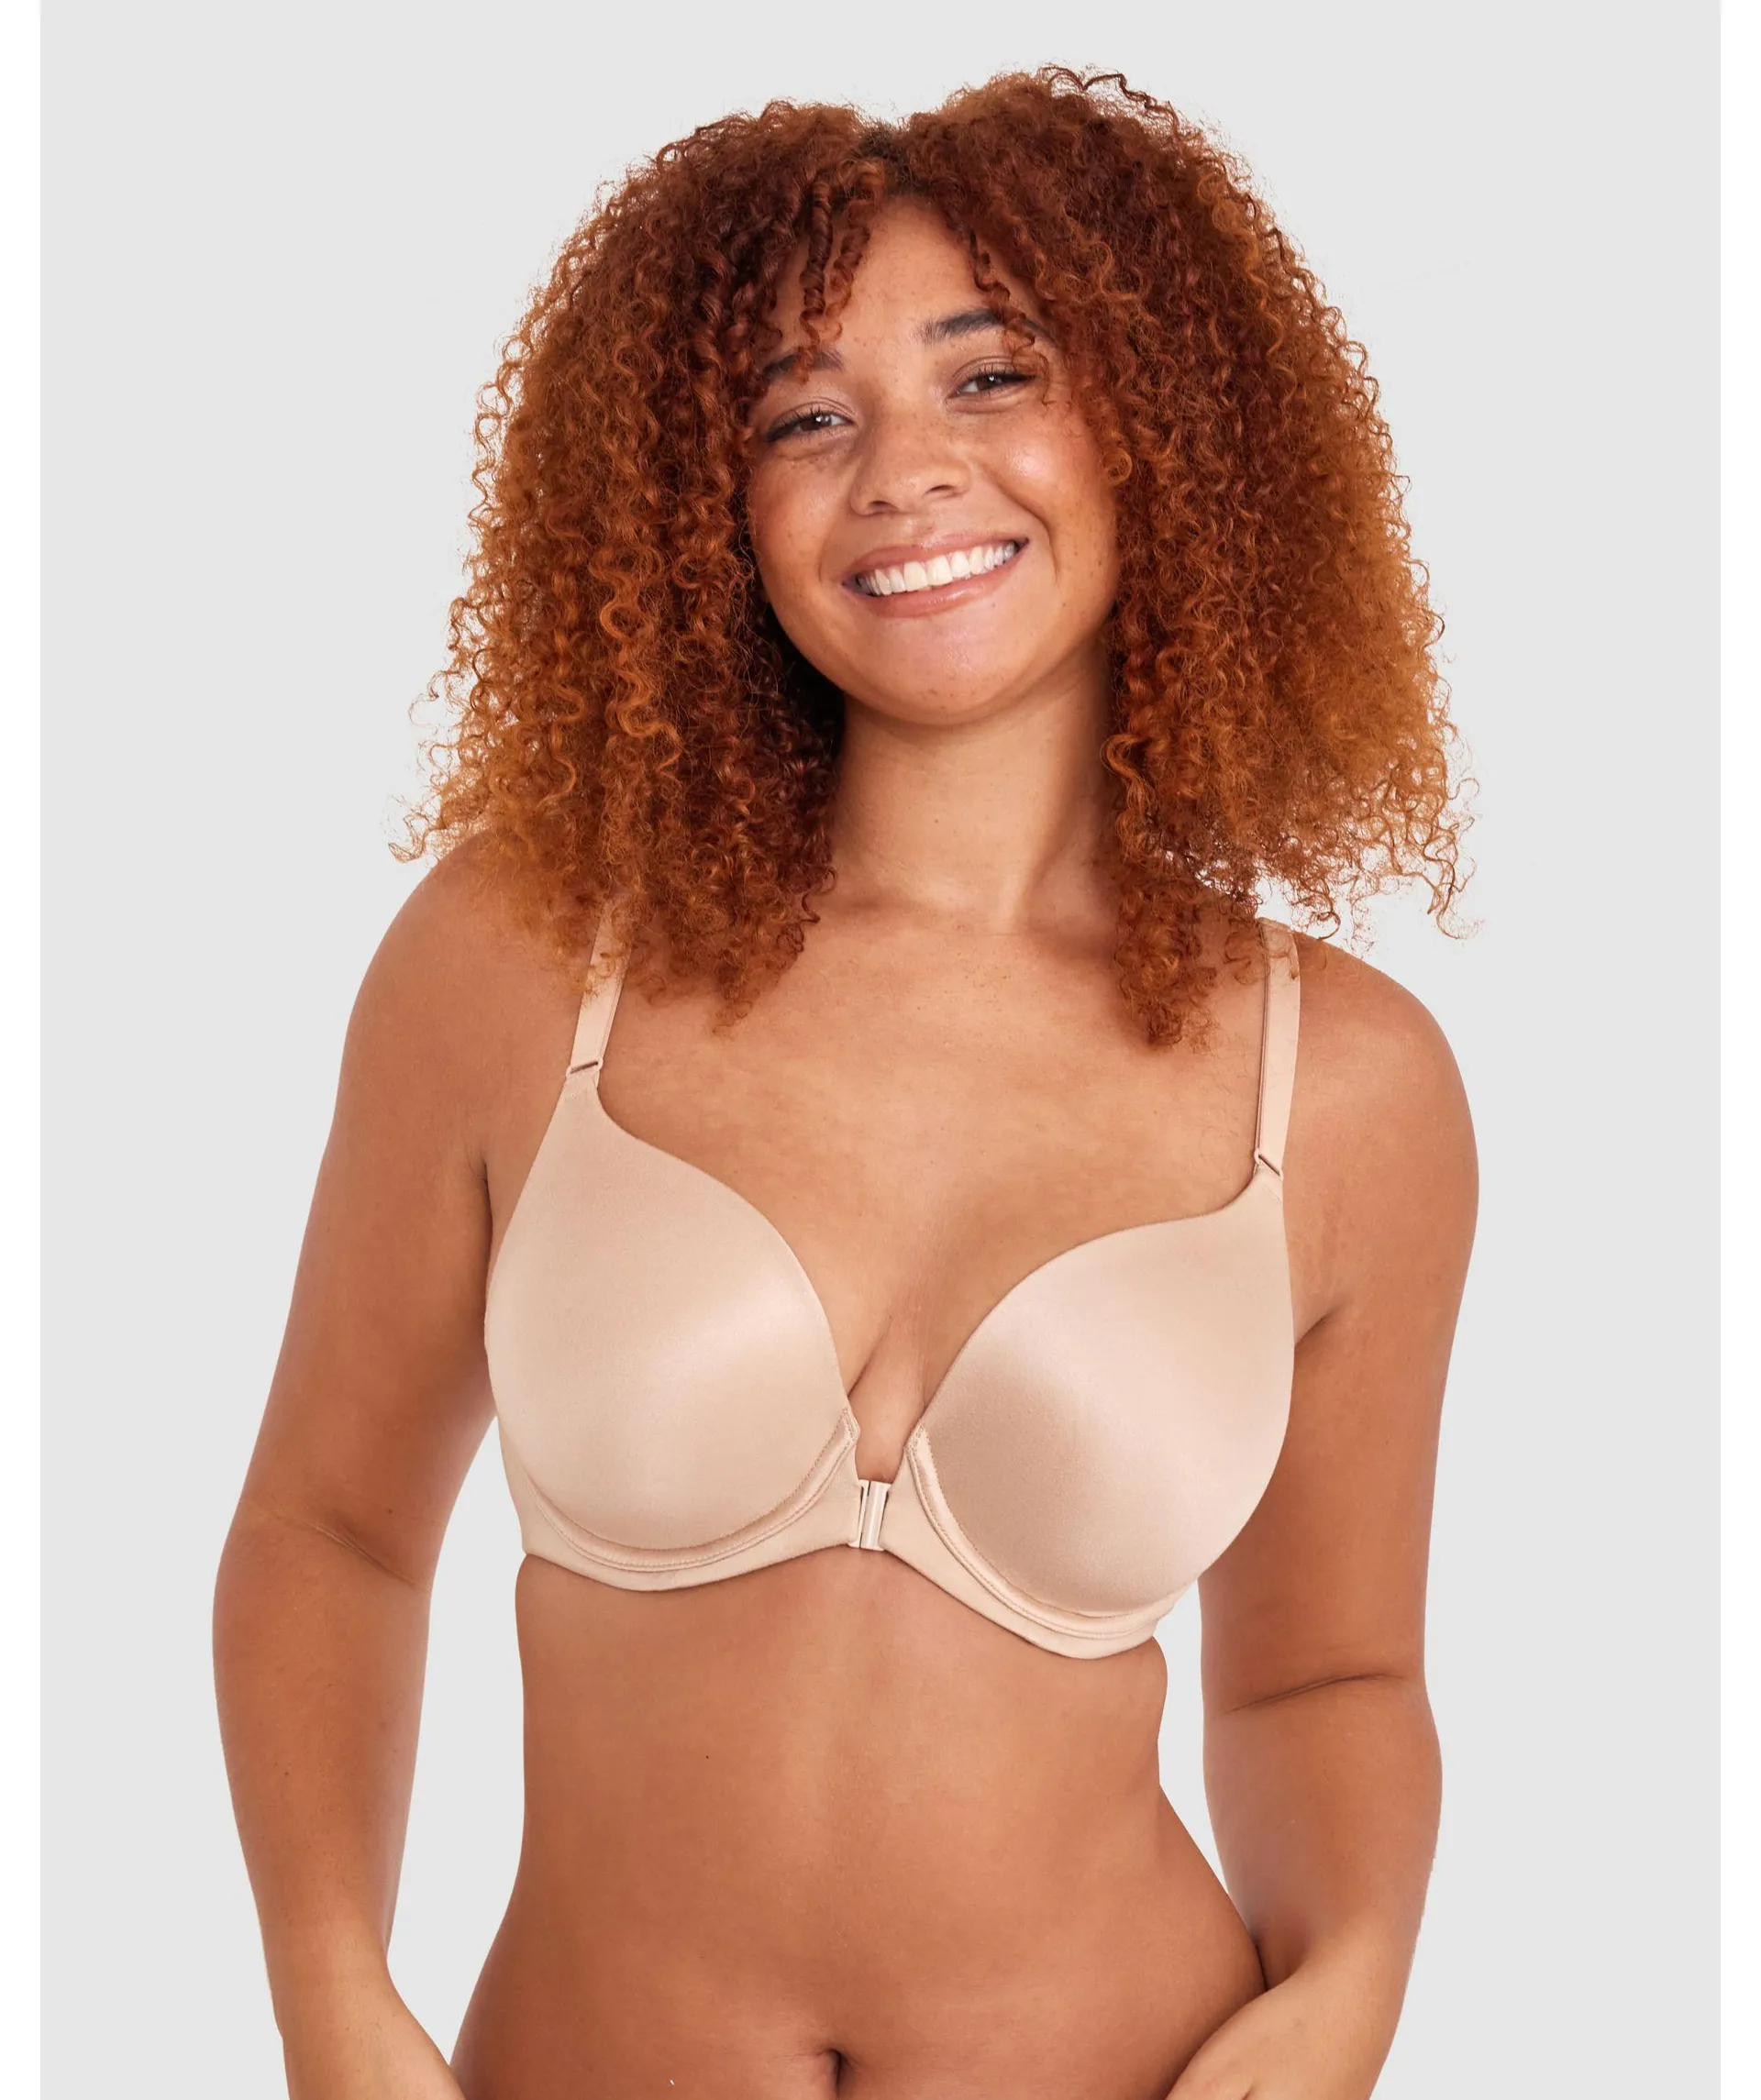 Body Bliss Front Closure Full Cup Bra - Nude 2